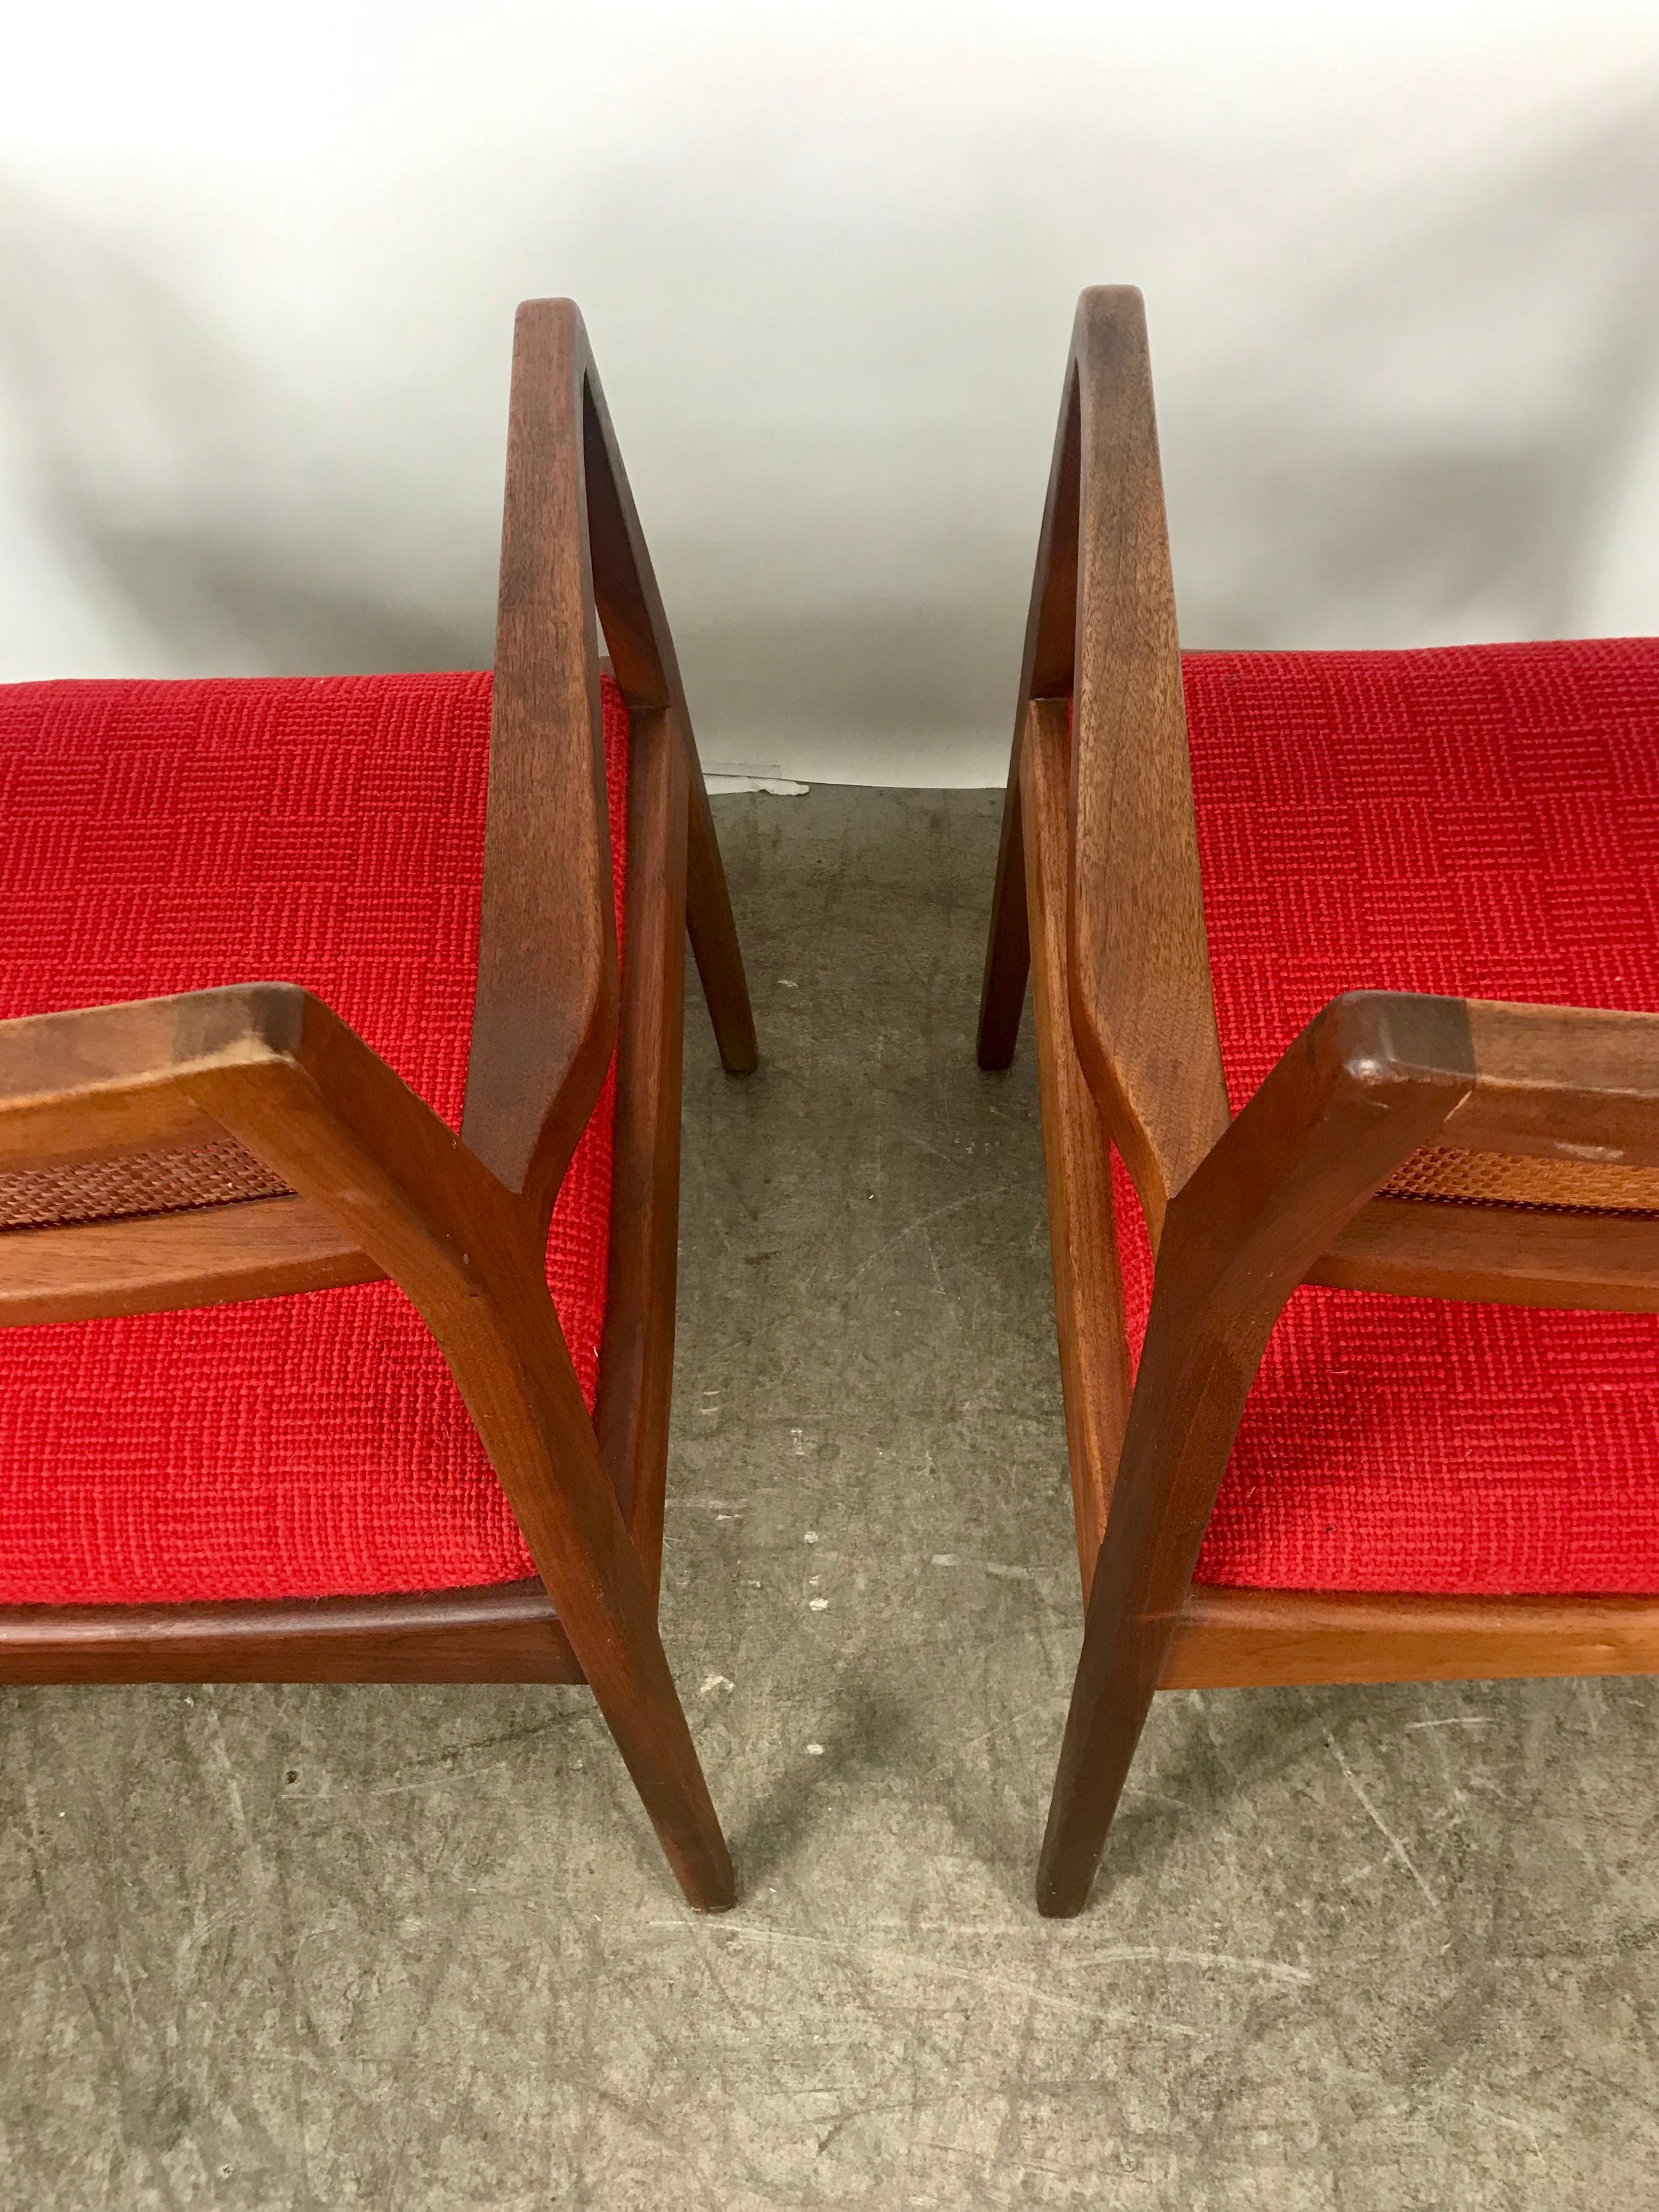 Matched Pair of Modernist Jens Risom Walnut and Caned Back Lounge Chair 1